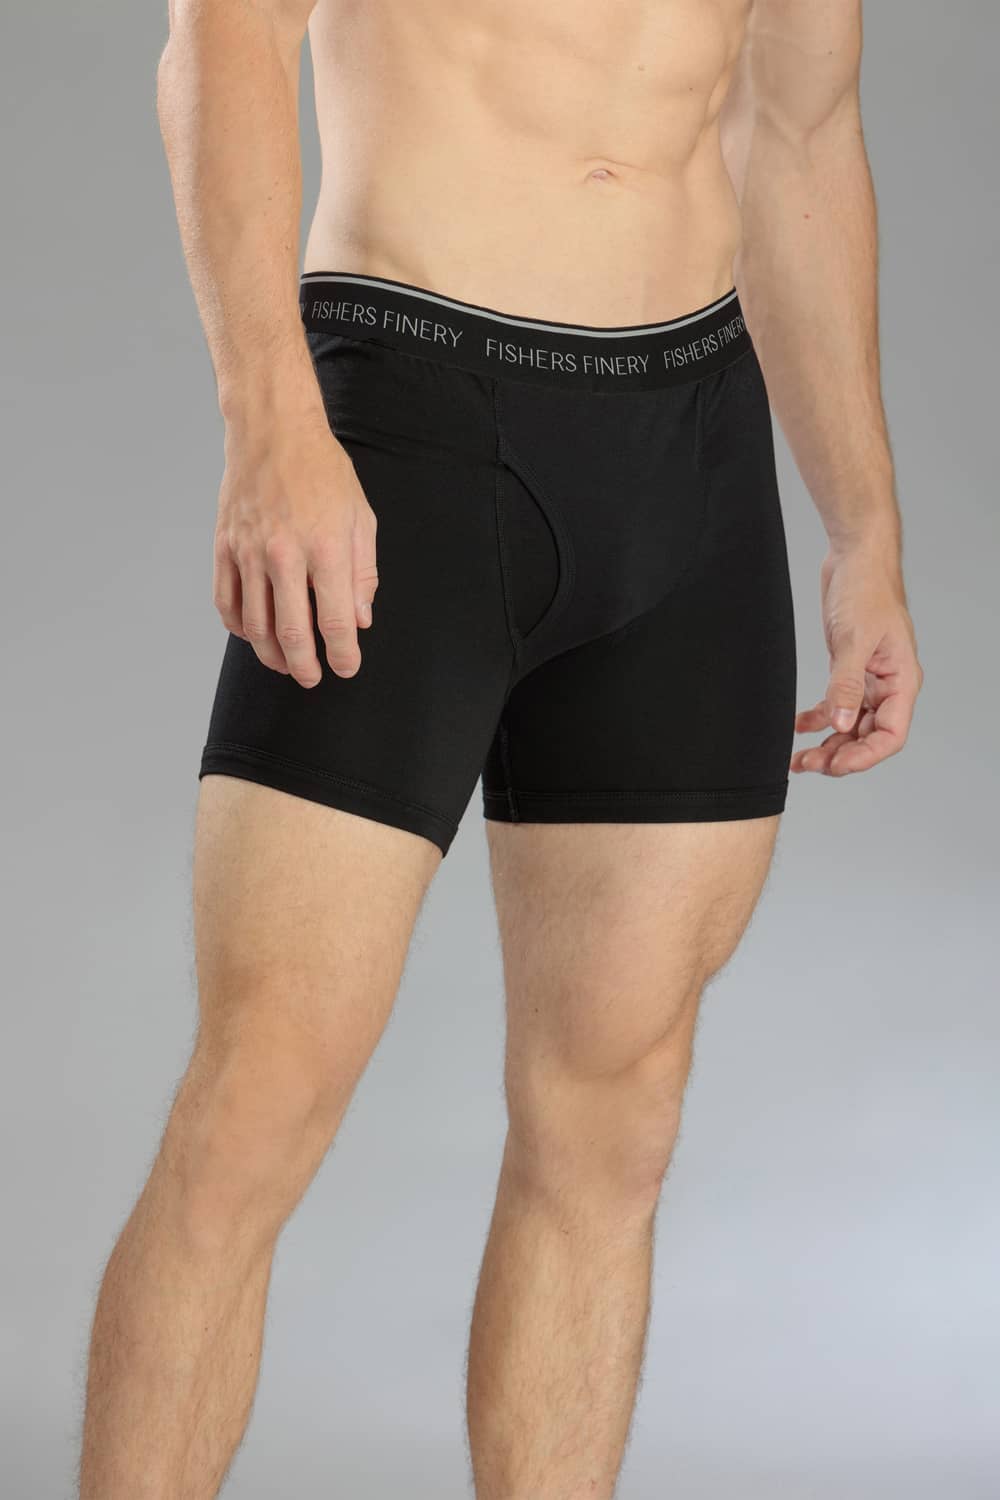 Men's Classic Fit Soft Stretch Boxer Brief - Multi Pack Options Mens>Underwear Fishers Finery Black Small Single Pack